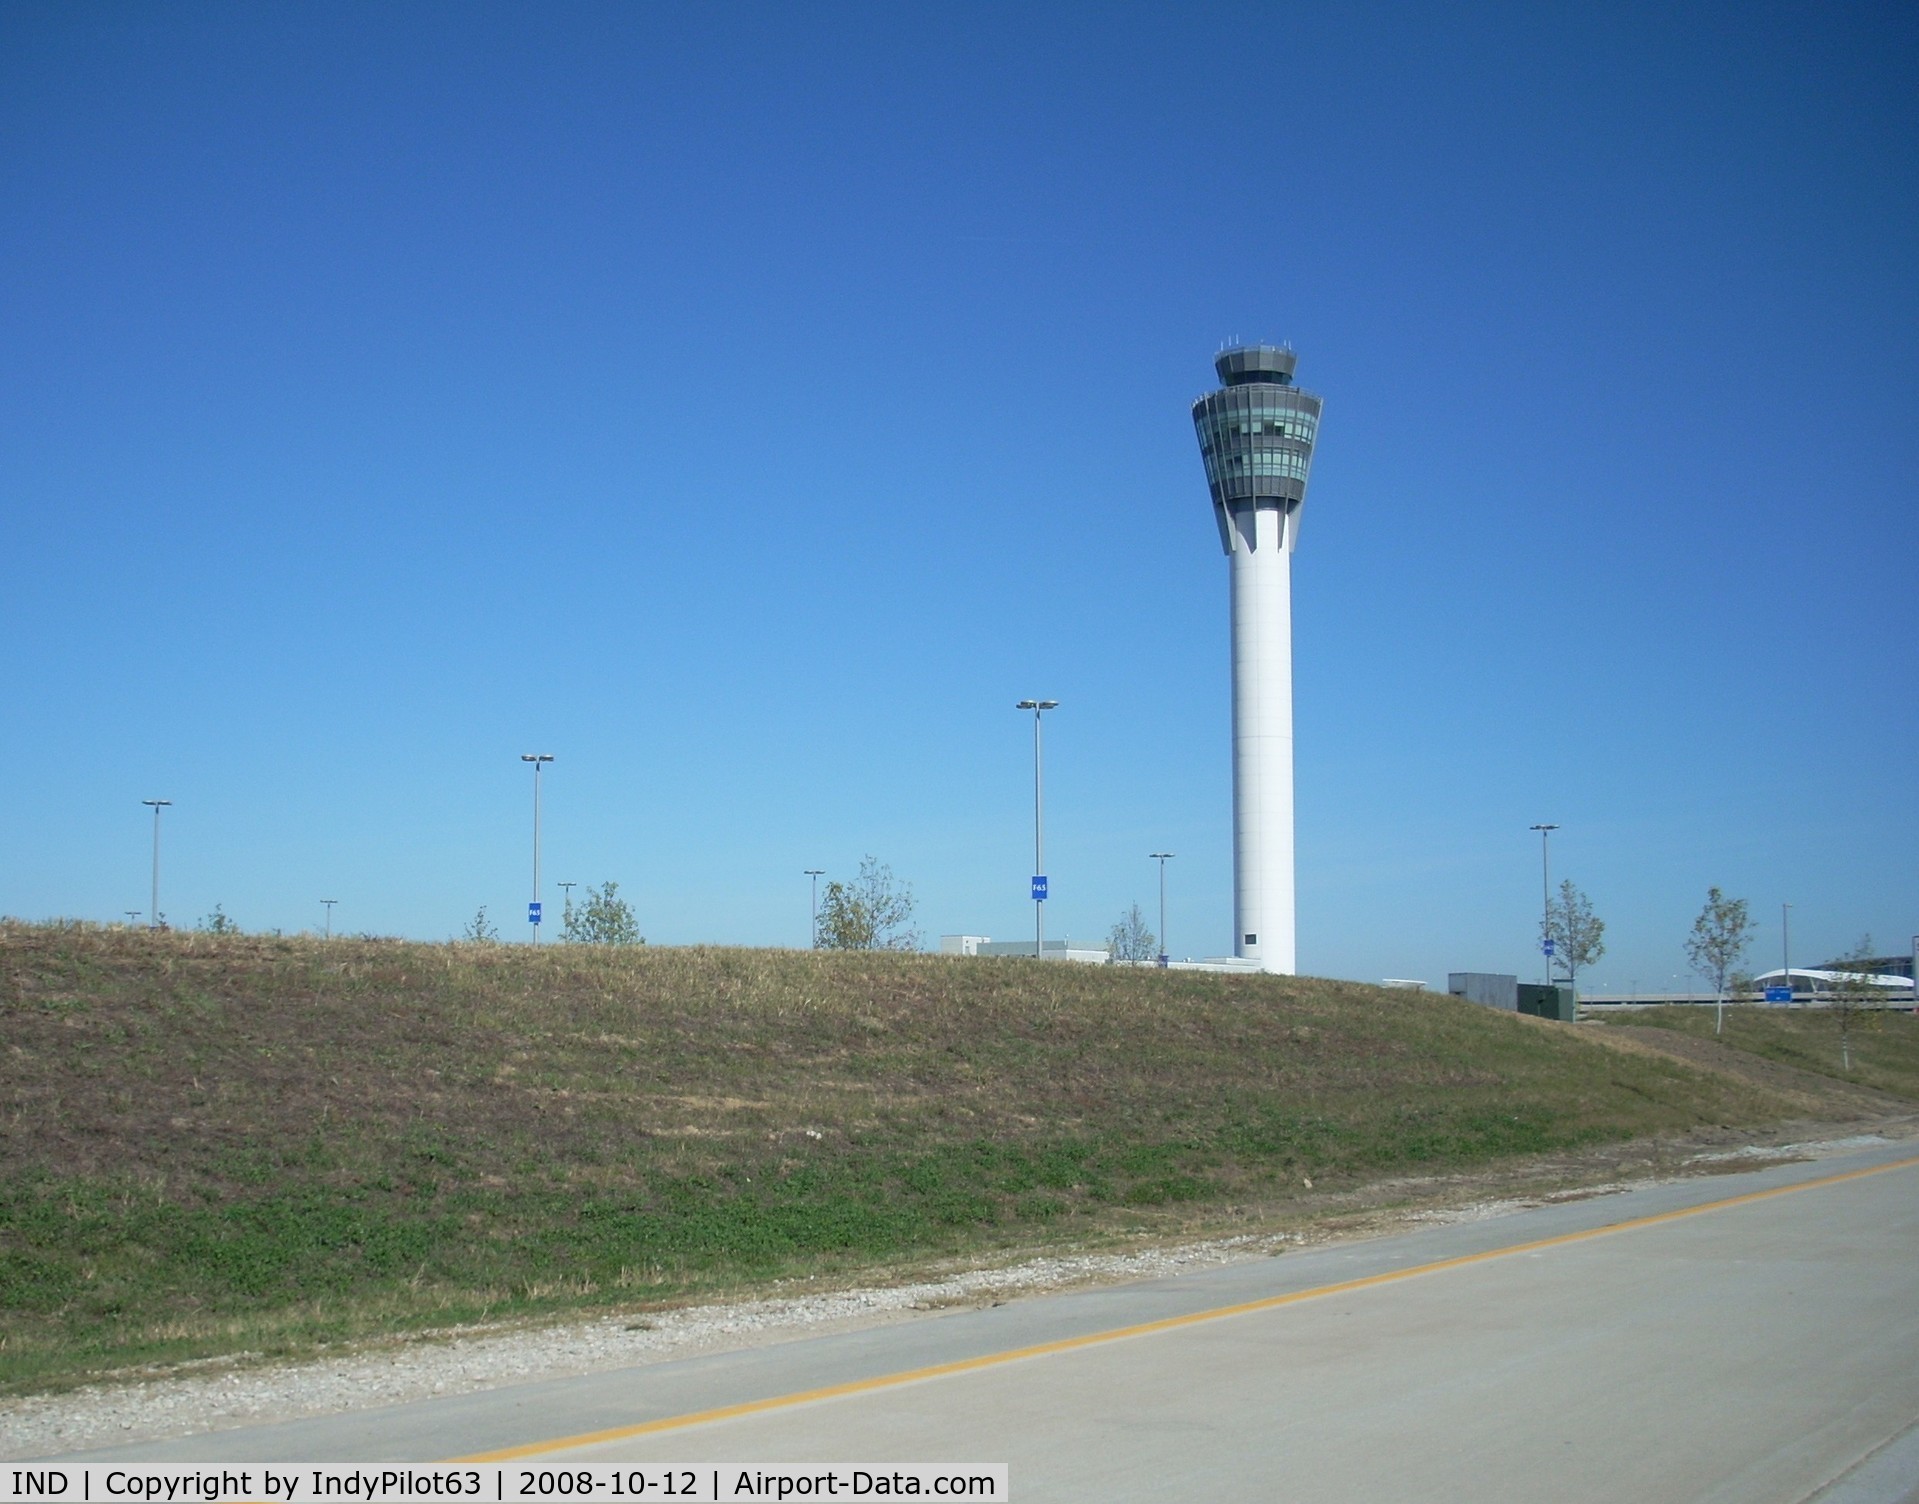 Indianapolis International Airport (IND) - The new 340 ft. tower...